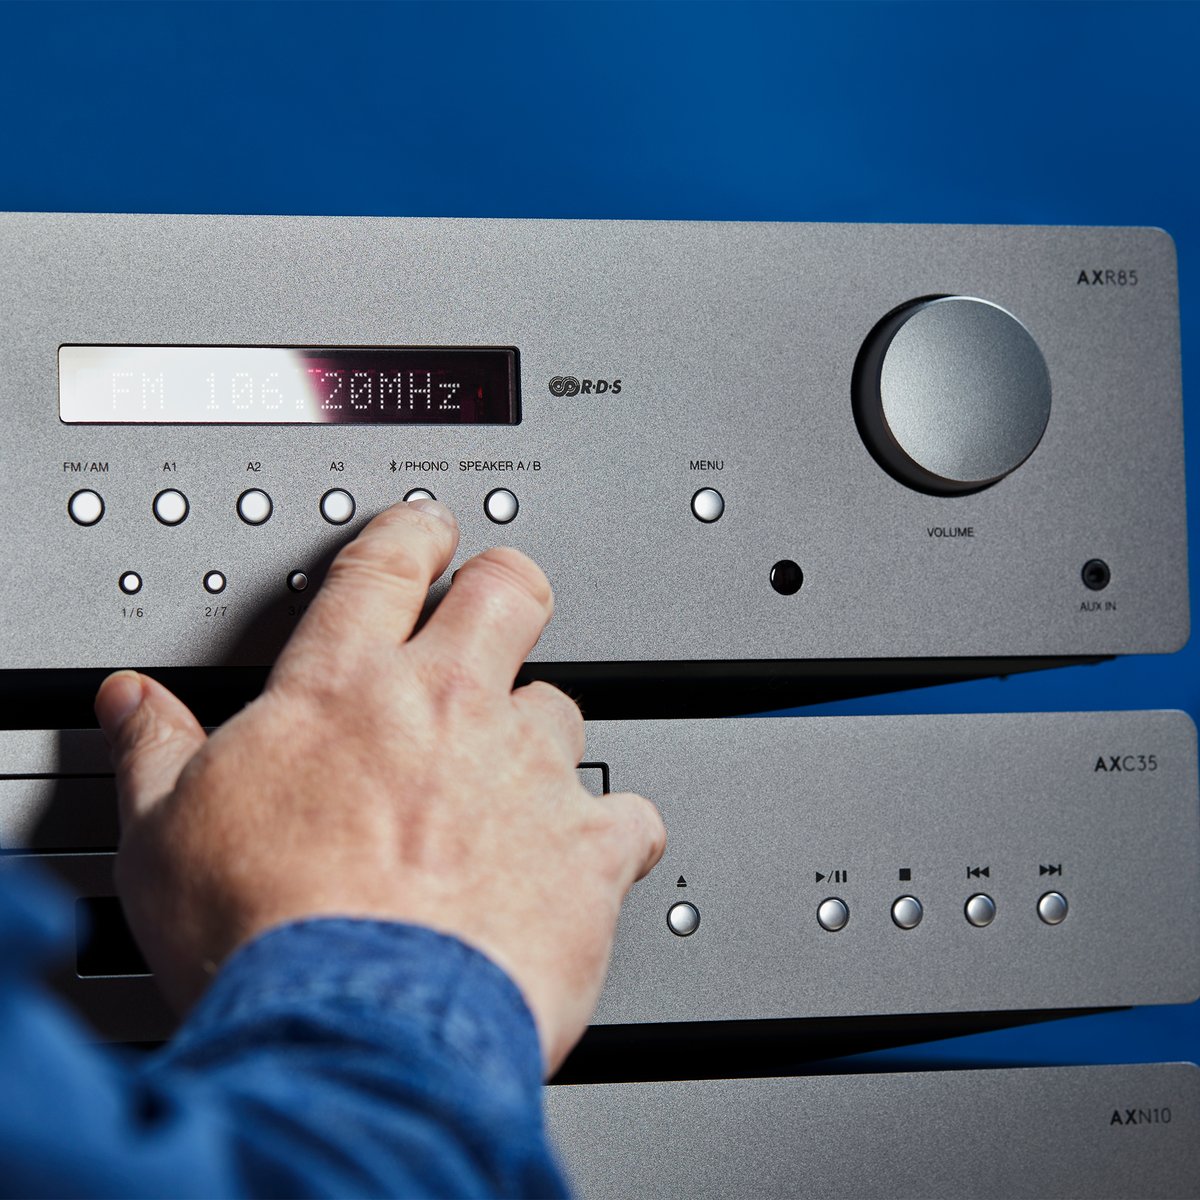 Everyone deserves great sound. With AXR85, you don't have to compromise on sound for budget. @gearpatrol has named AXR85 the Best-Looking Stereo Receiver Under $500 - a fully featured and refined audio system that won't cost the earth. Learn more: bit.ly/gear-patrol-ax…